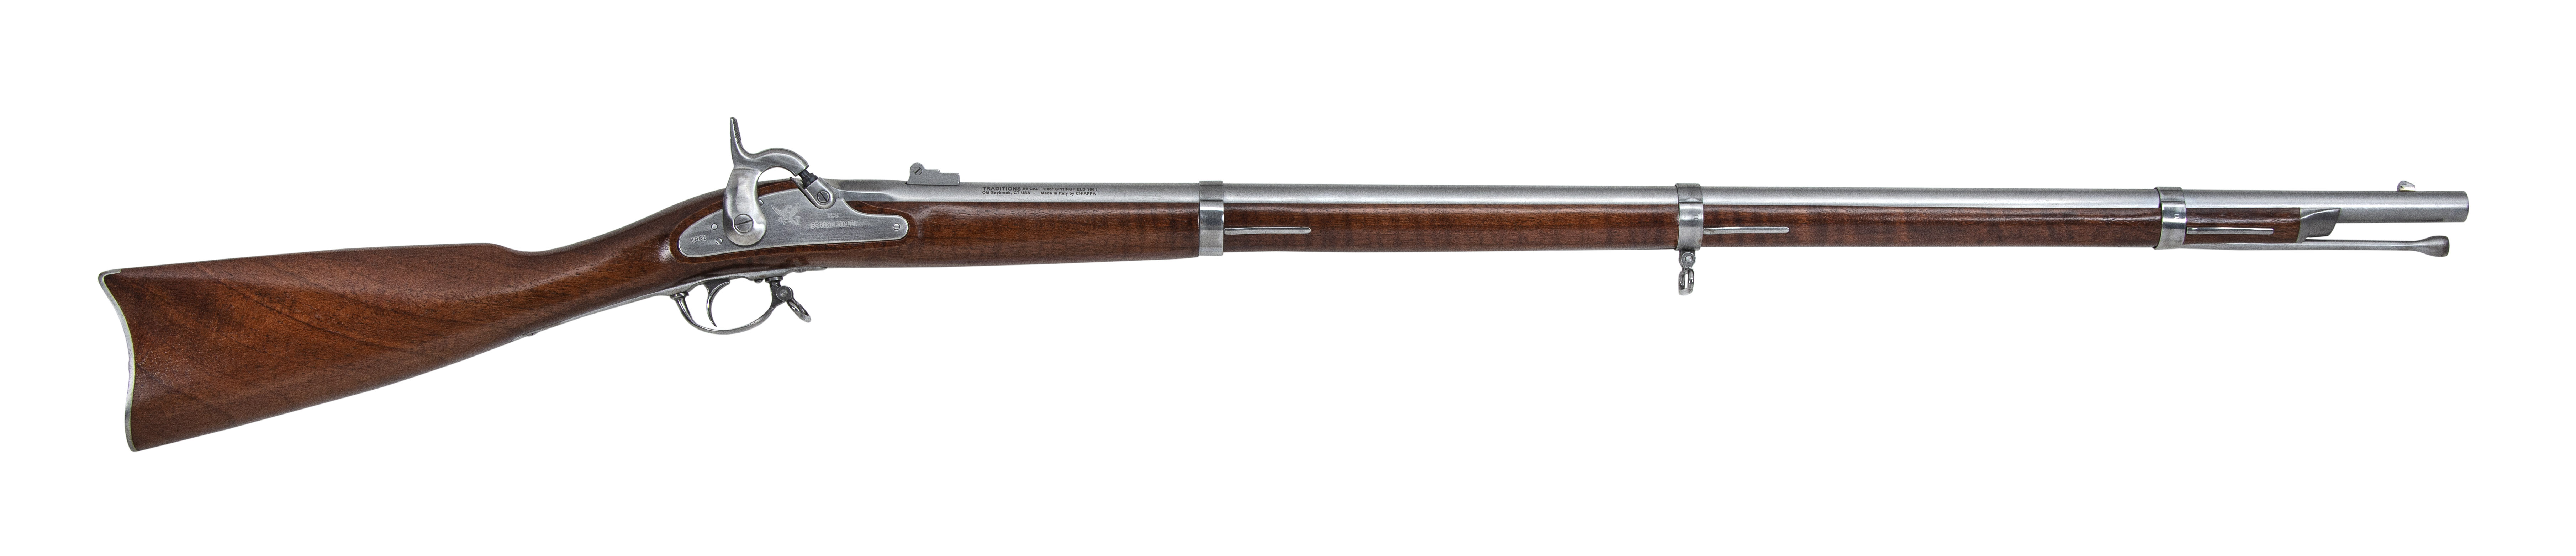 Traditions 1861 Springfield Musket